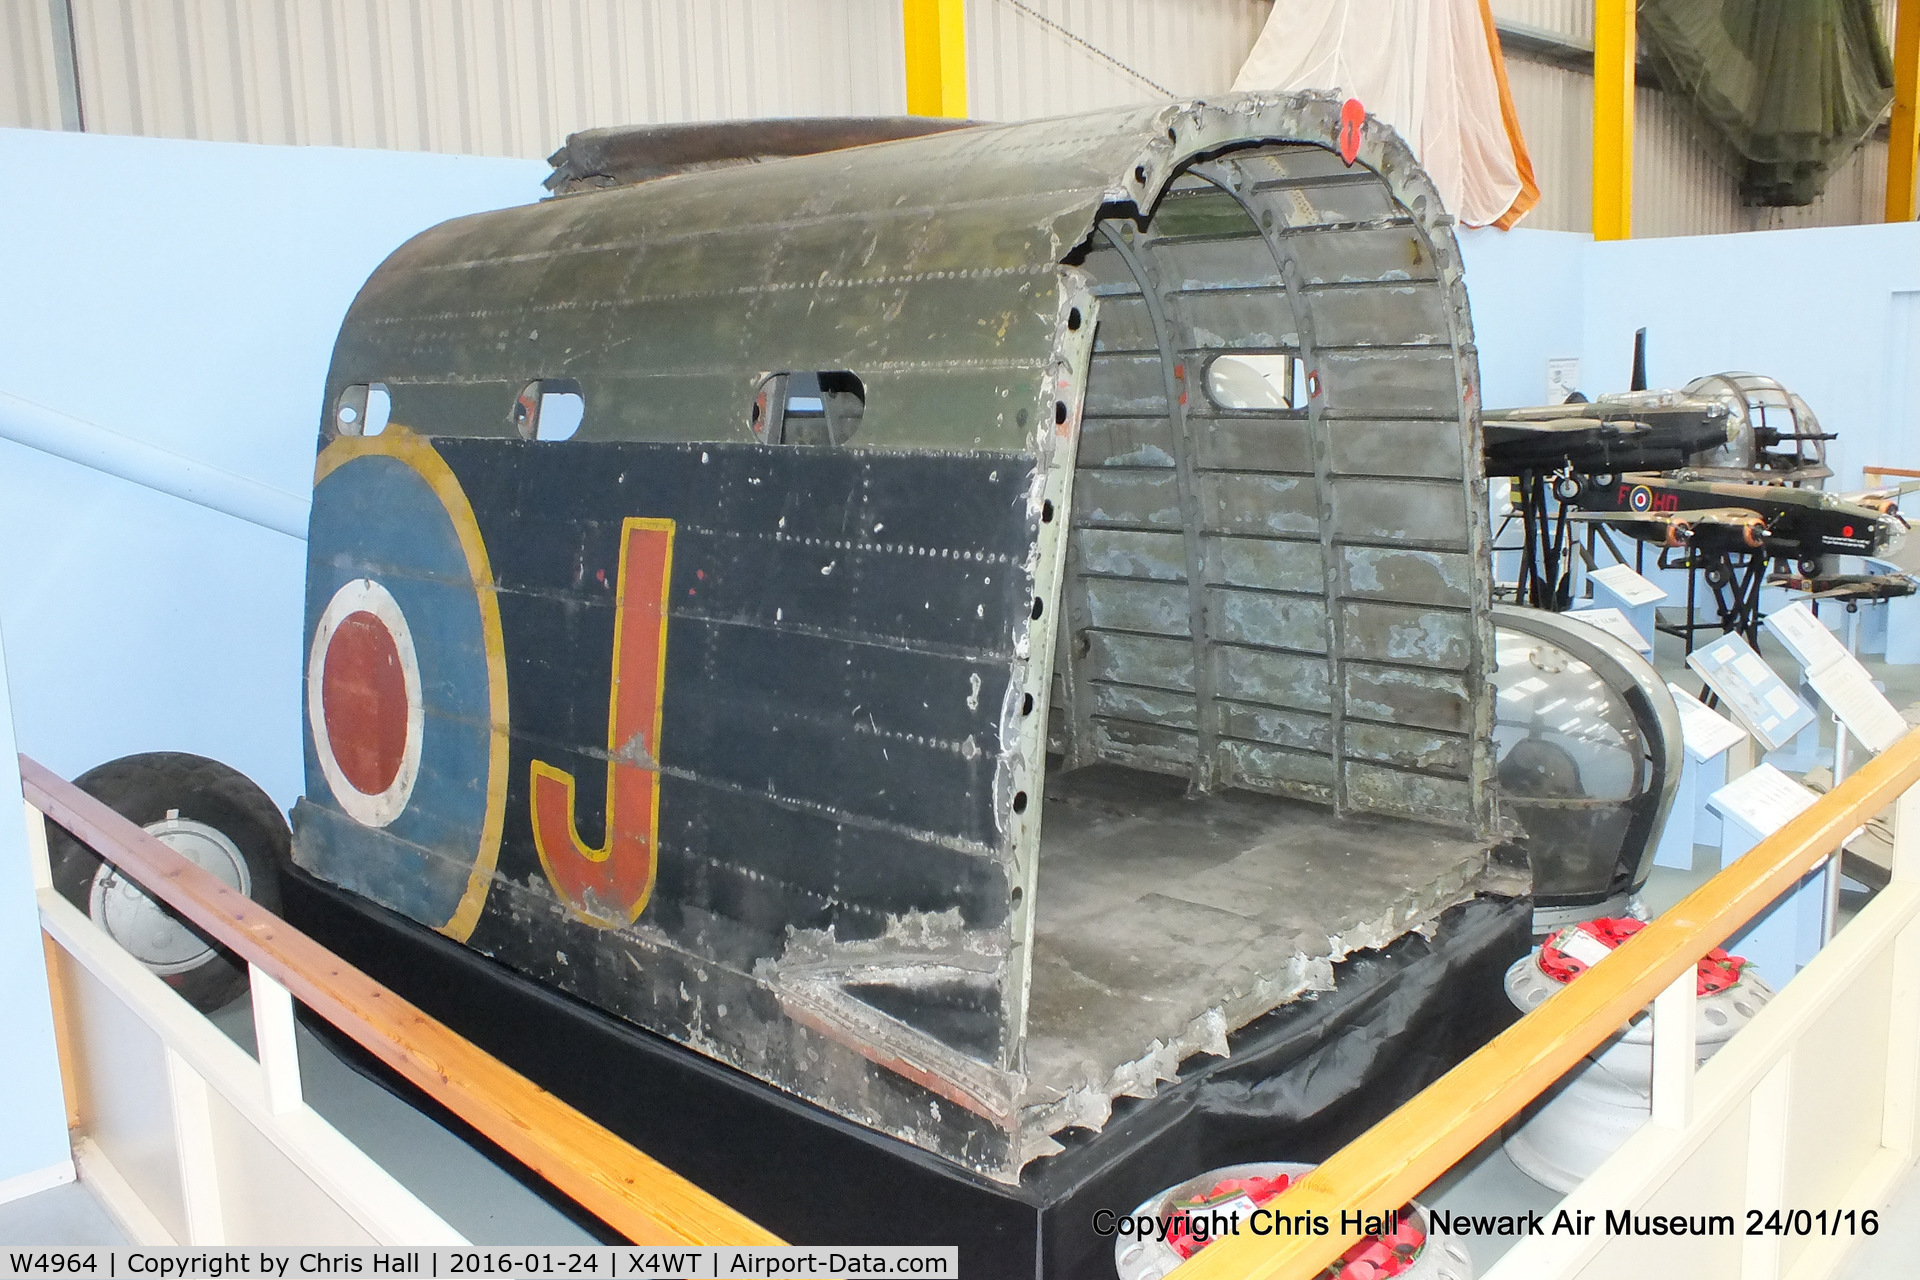 W4964, 1943 Avro Lancaster B.1 C/N W4964, fuselage section of IX(B) Sqn Lancaster W4964 WS-J, it had been used as a garden shed before being rescued and donated to the Newark Air Museum